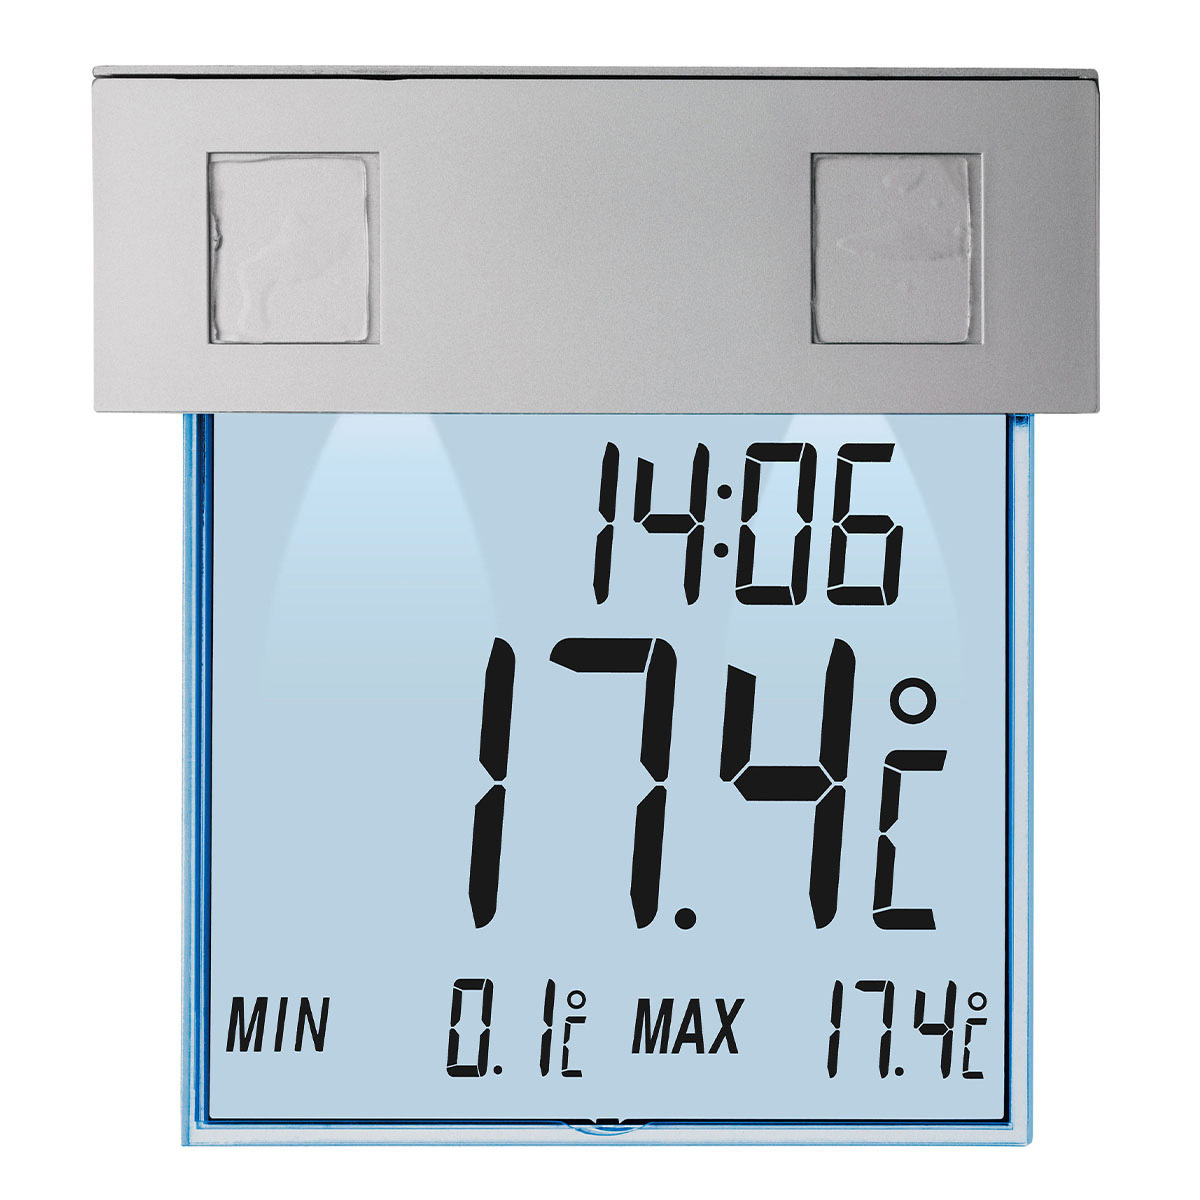 TFA 12.1016 Indoor Thermometer 